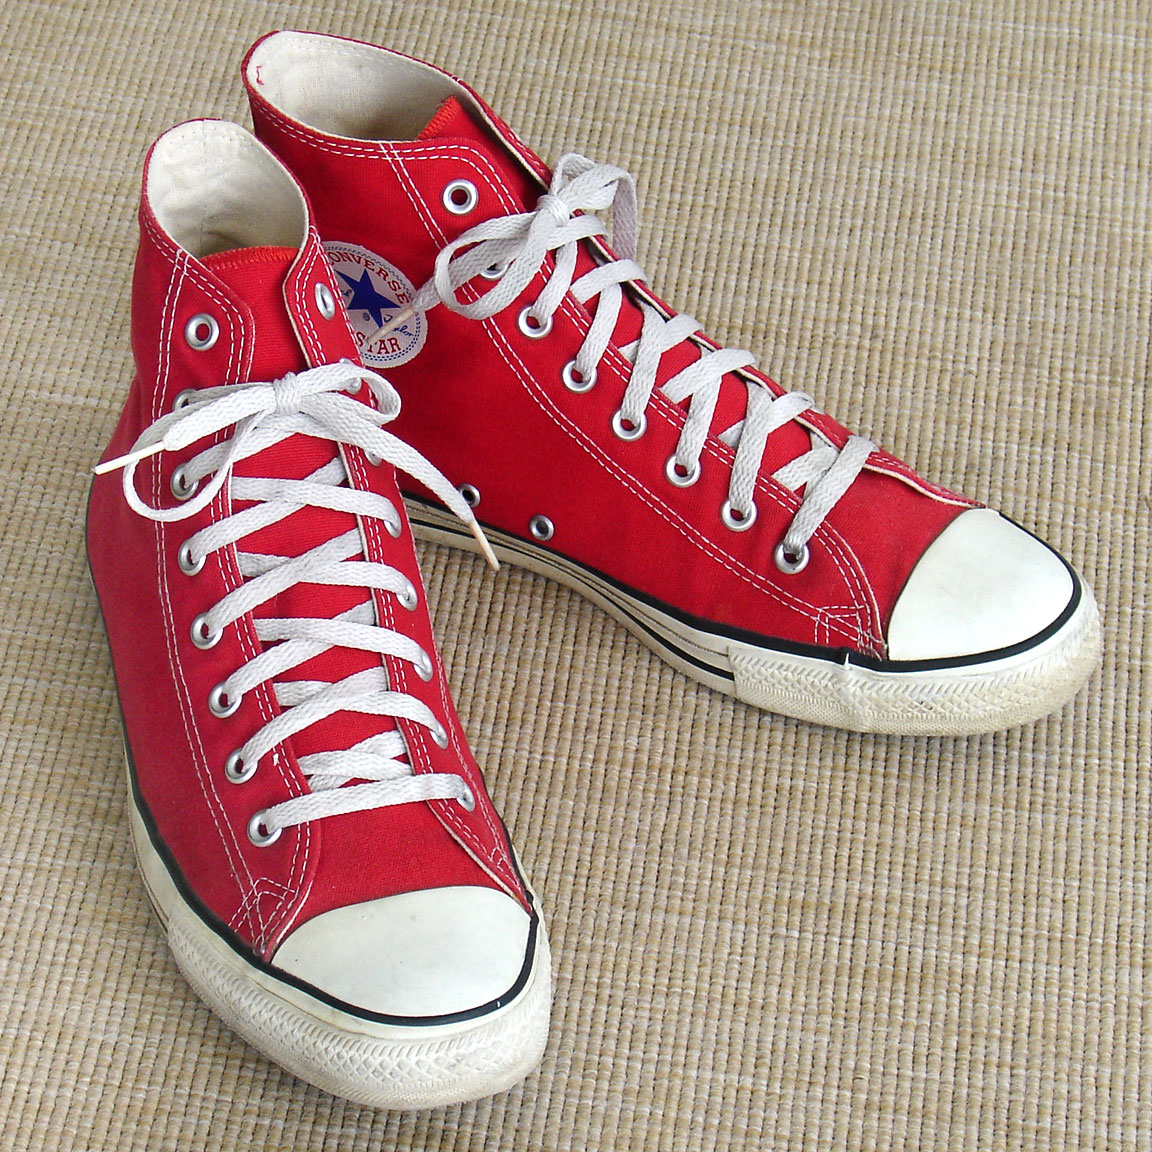 Vintage red hi-top American-made Converse All Star Chuck Taylor shoes for sale at http://www.collectornet.net/shoes